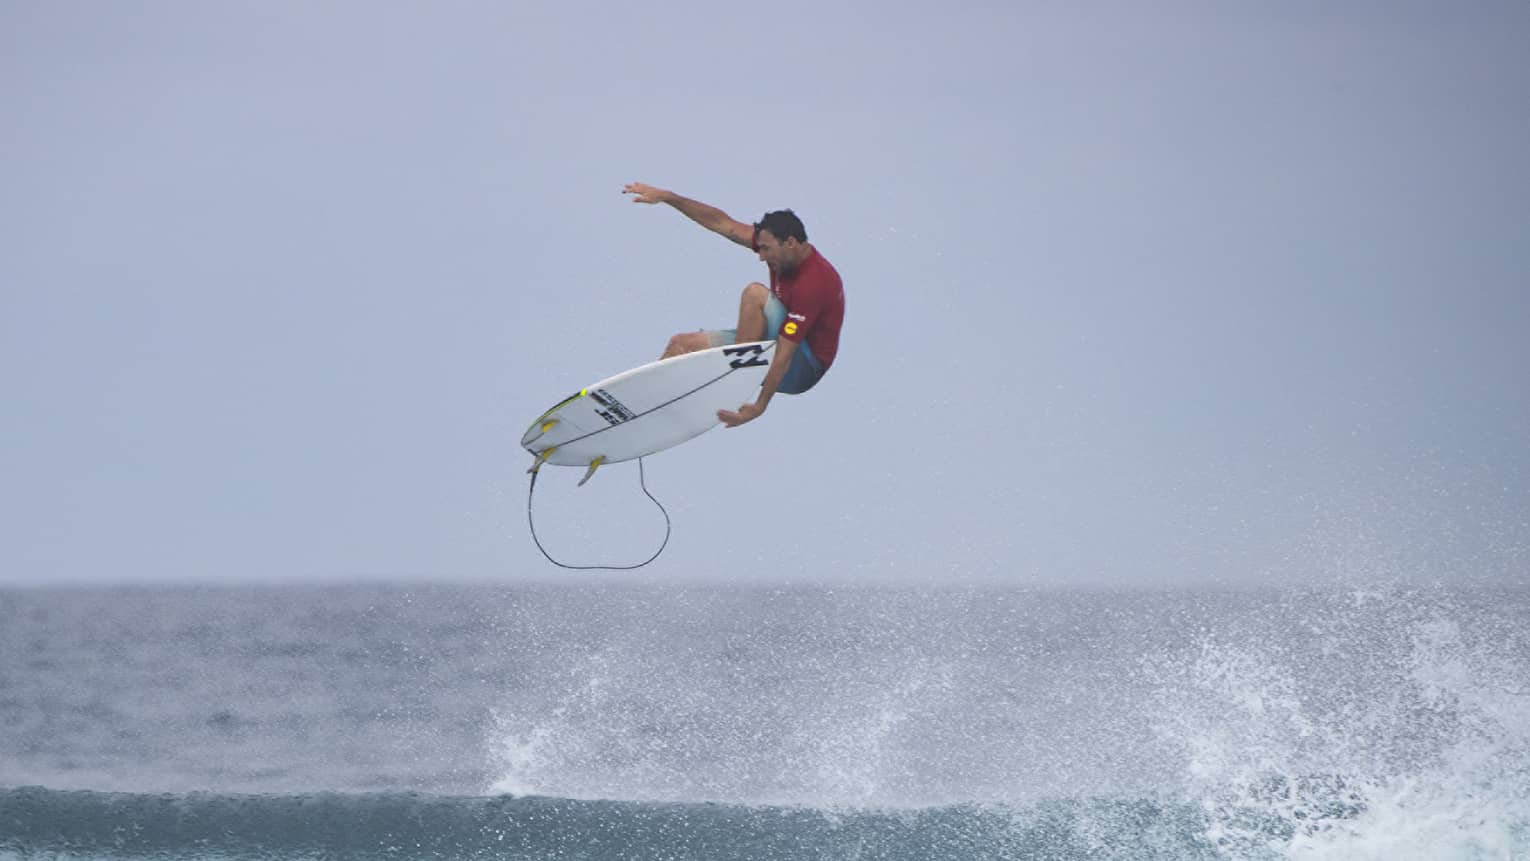 Surfer grips surfboard mid-air while riding the waves